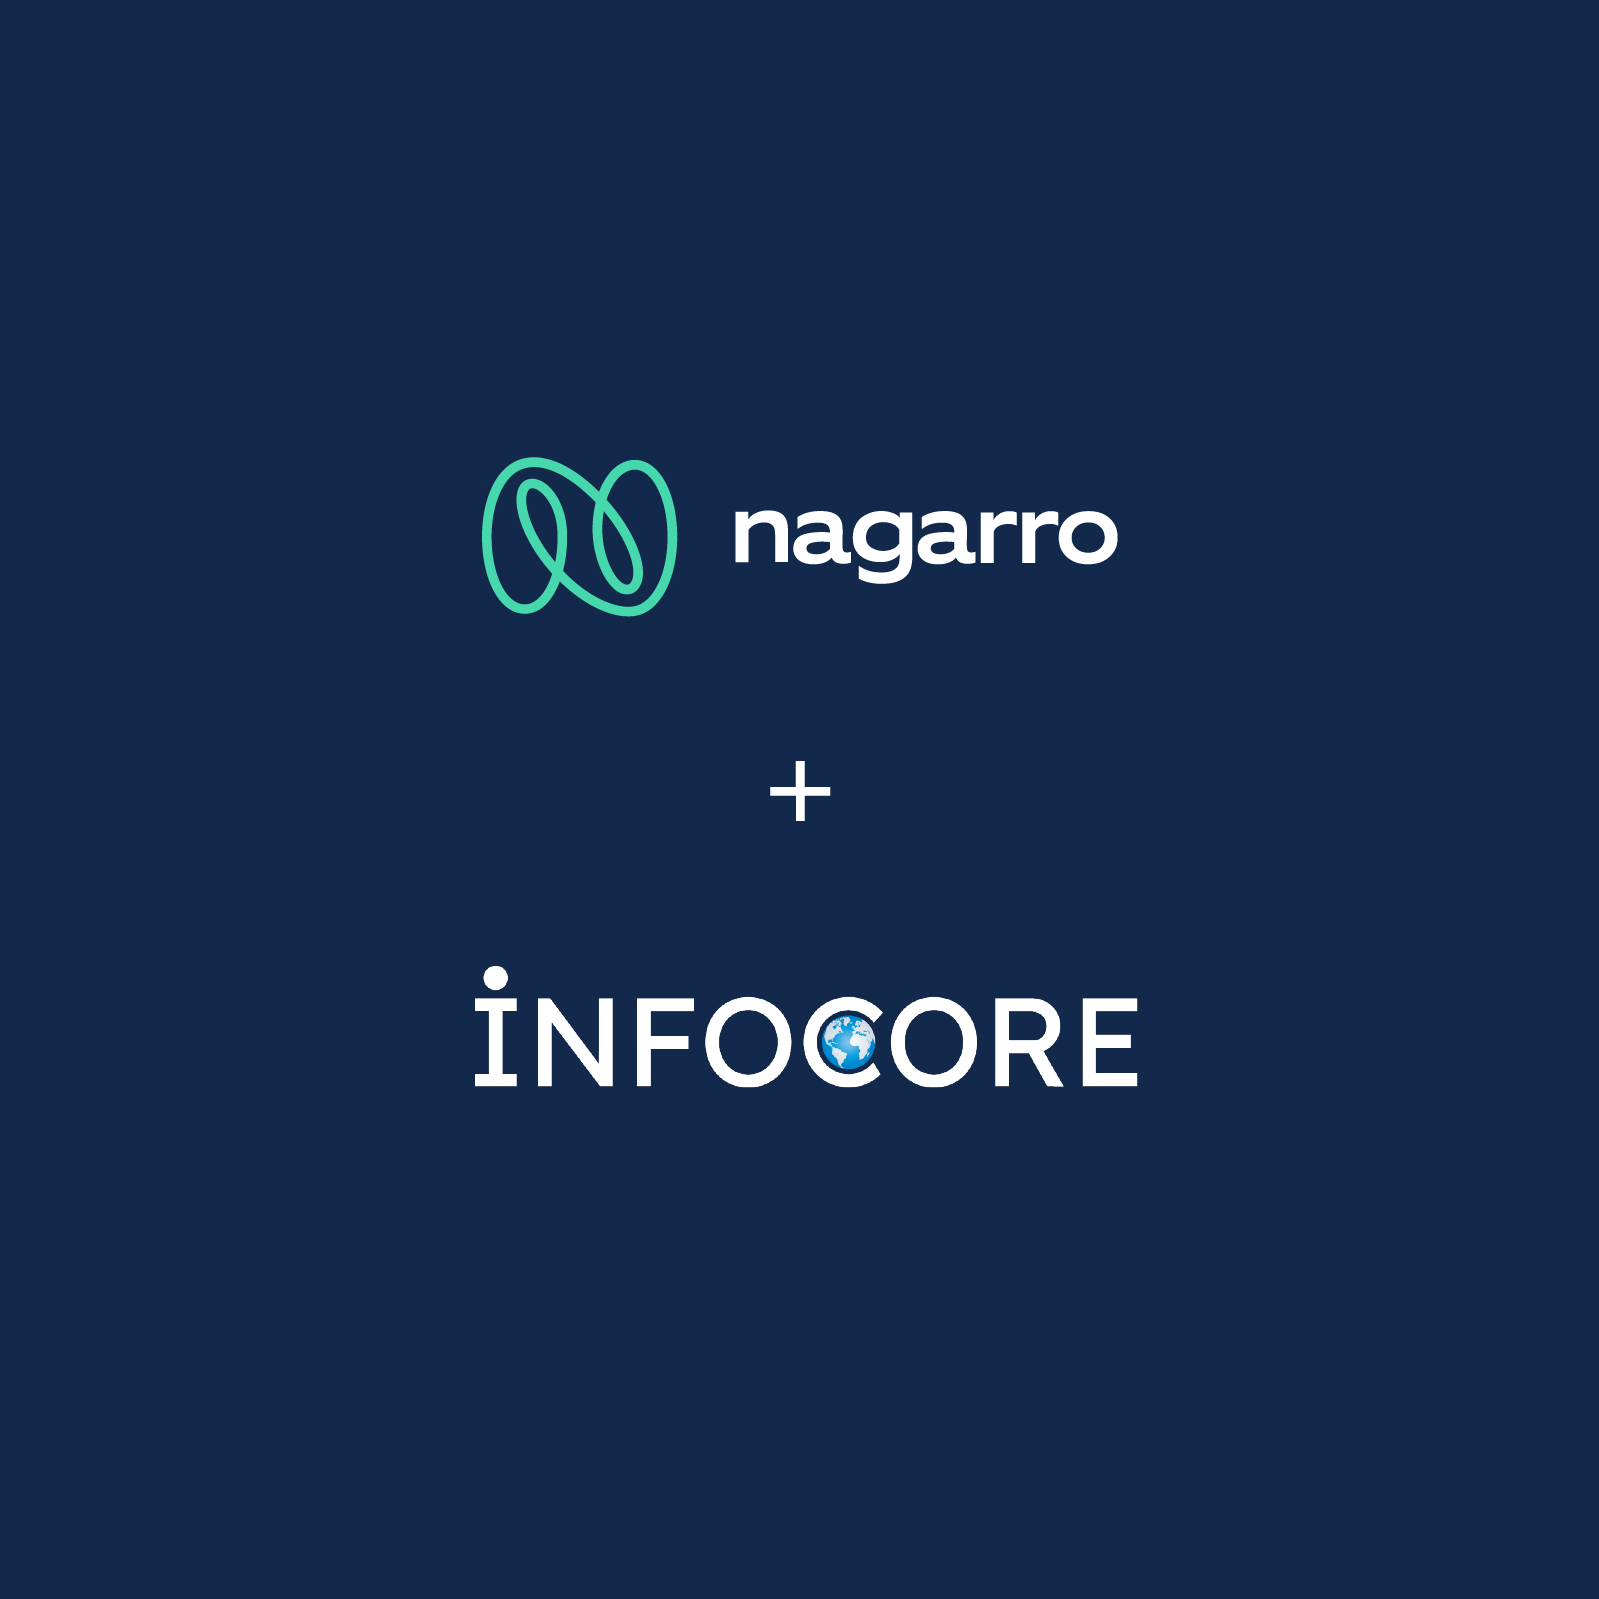 Nagarro acquires Infocore group to enhance Industry 4.0 offerings